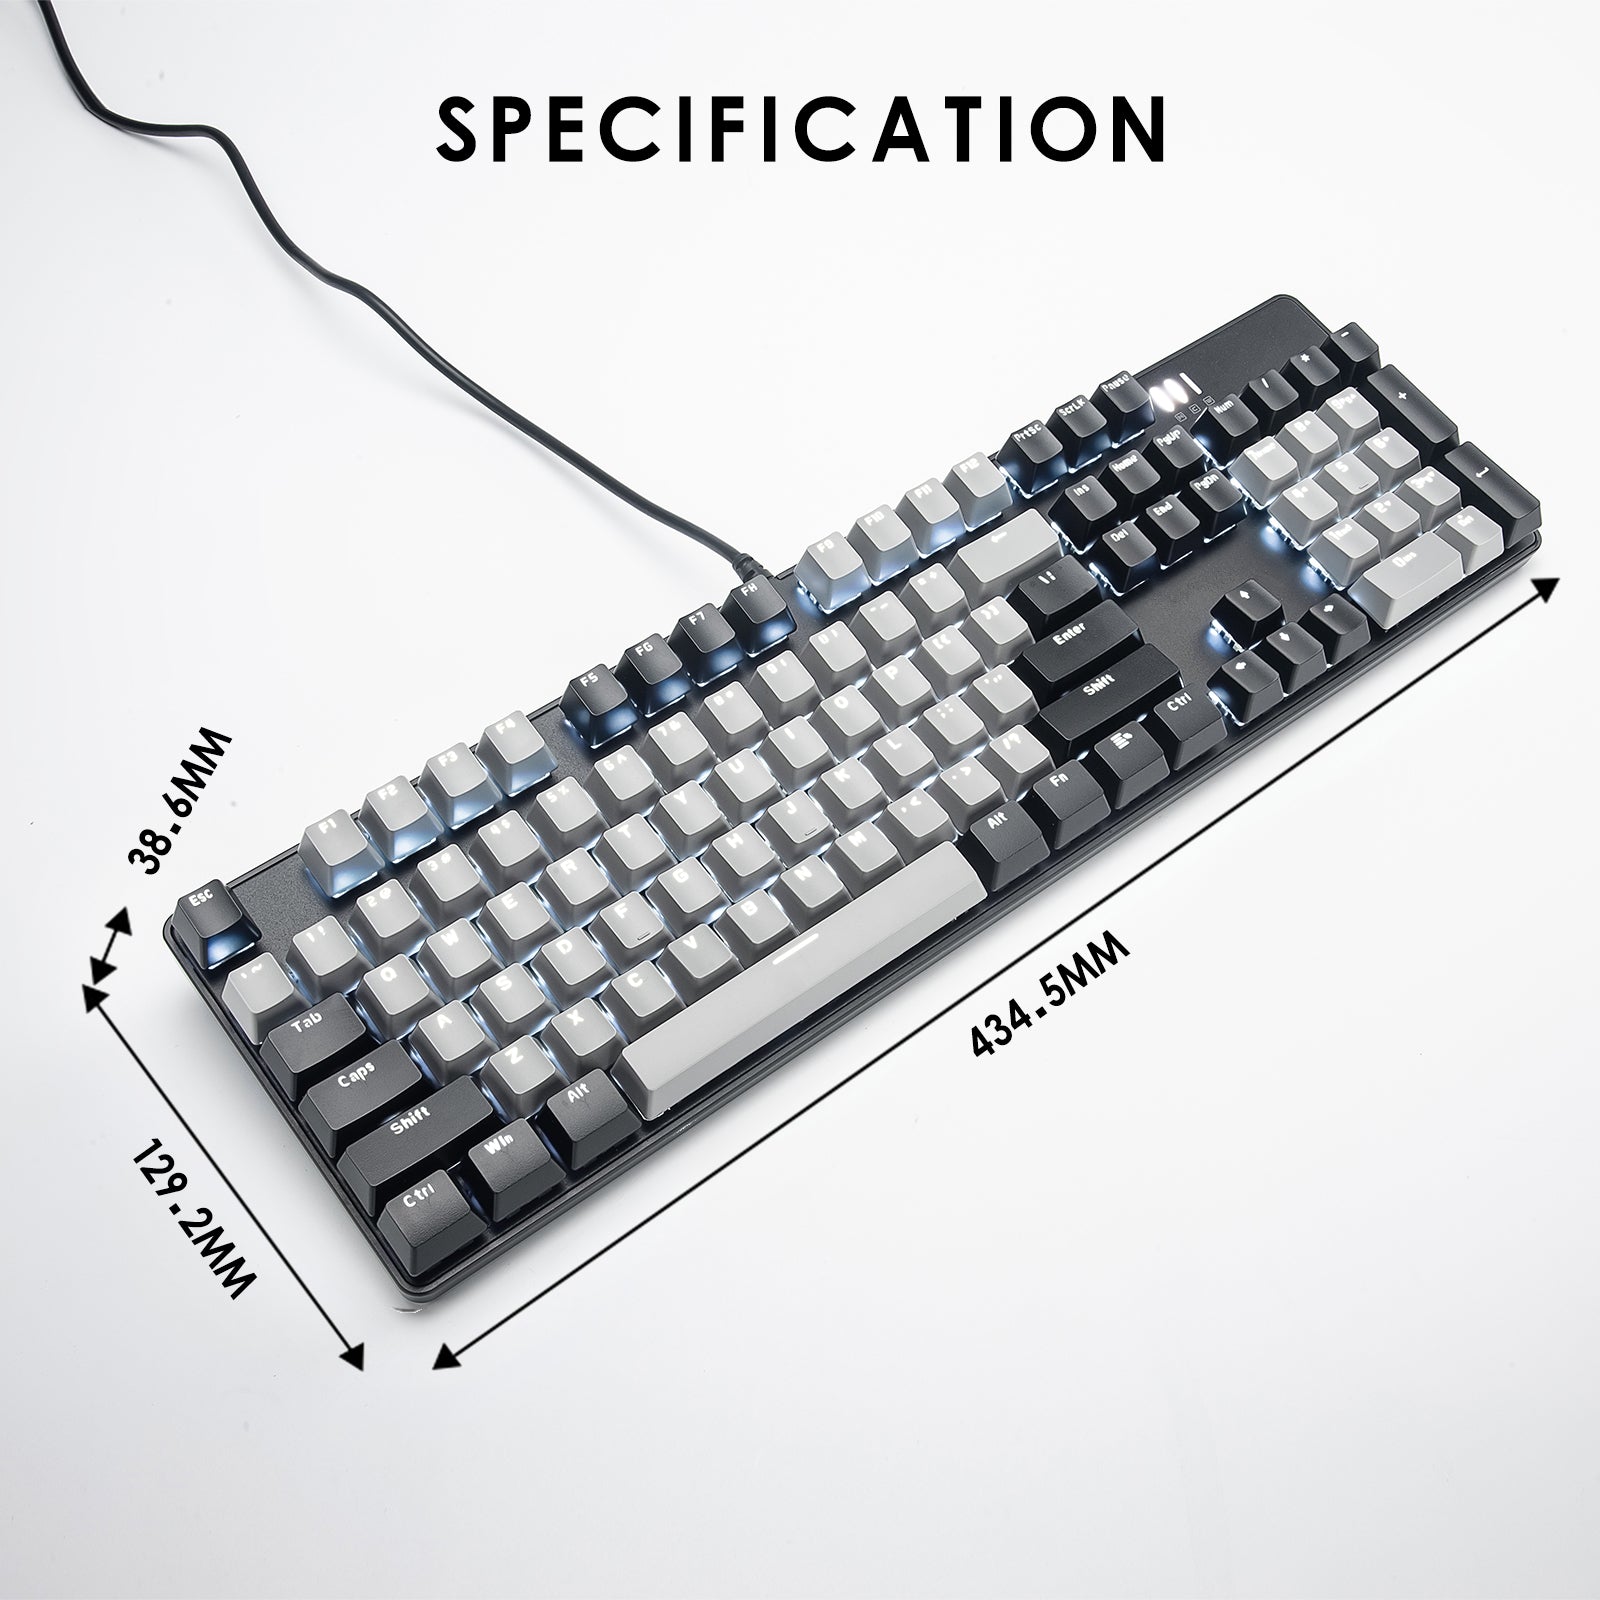 J9-Series Wired 104-Key Anti-Ghosting Blue Switch Mechanical Gaming Keyboard with Blue LED Backlit